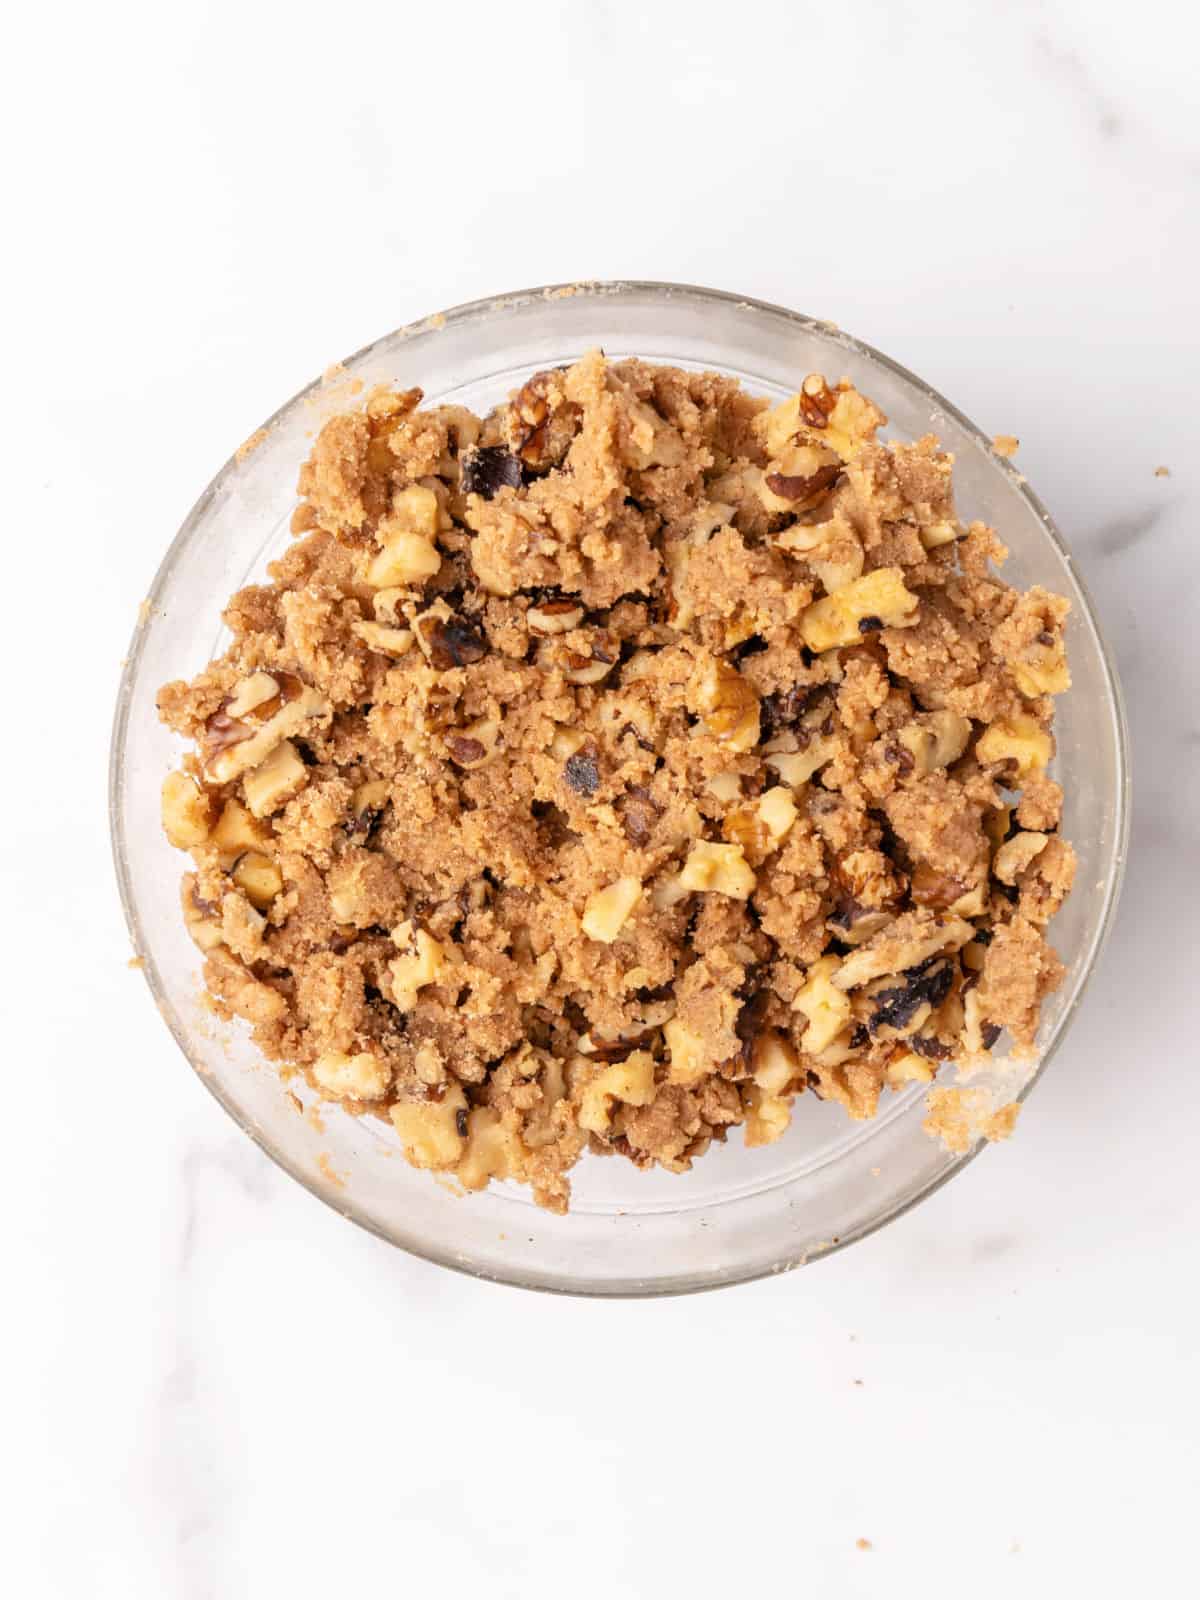 Streusel mixture with walnuts, brown sugar, and cinnamon in a glass bowl on white marble surface.